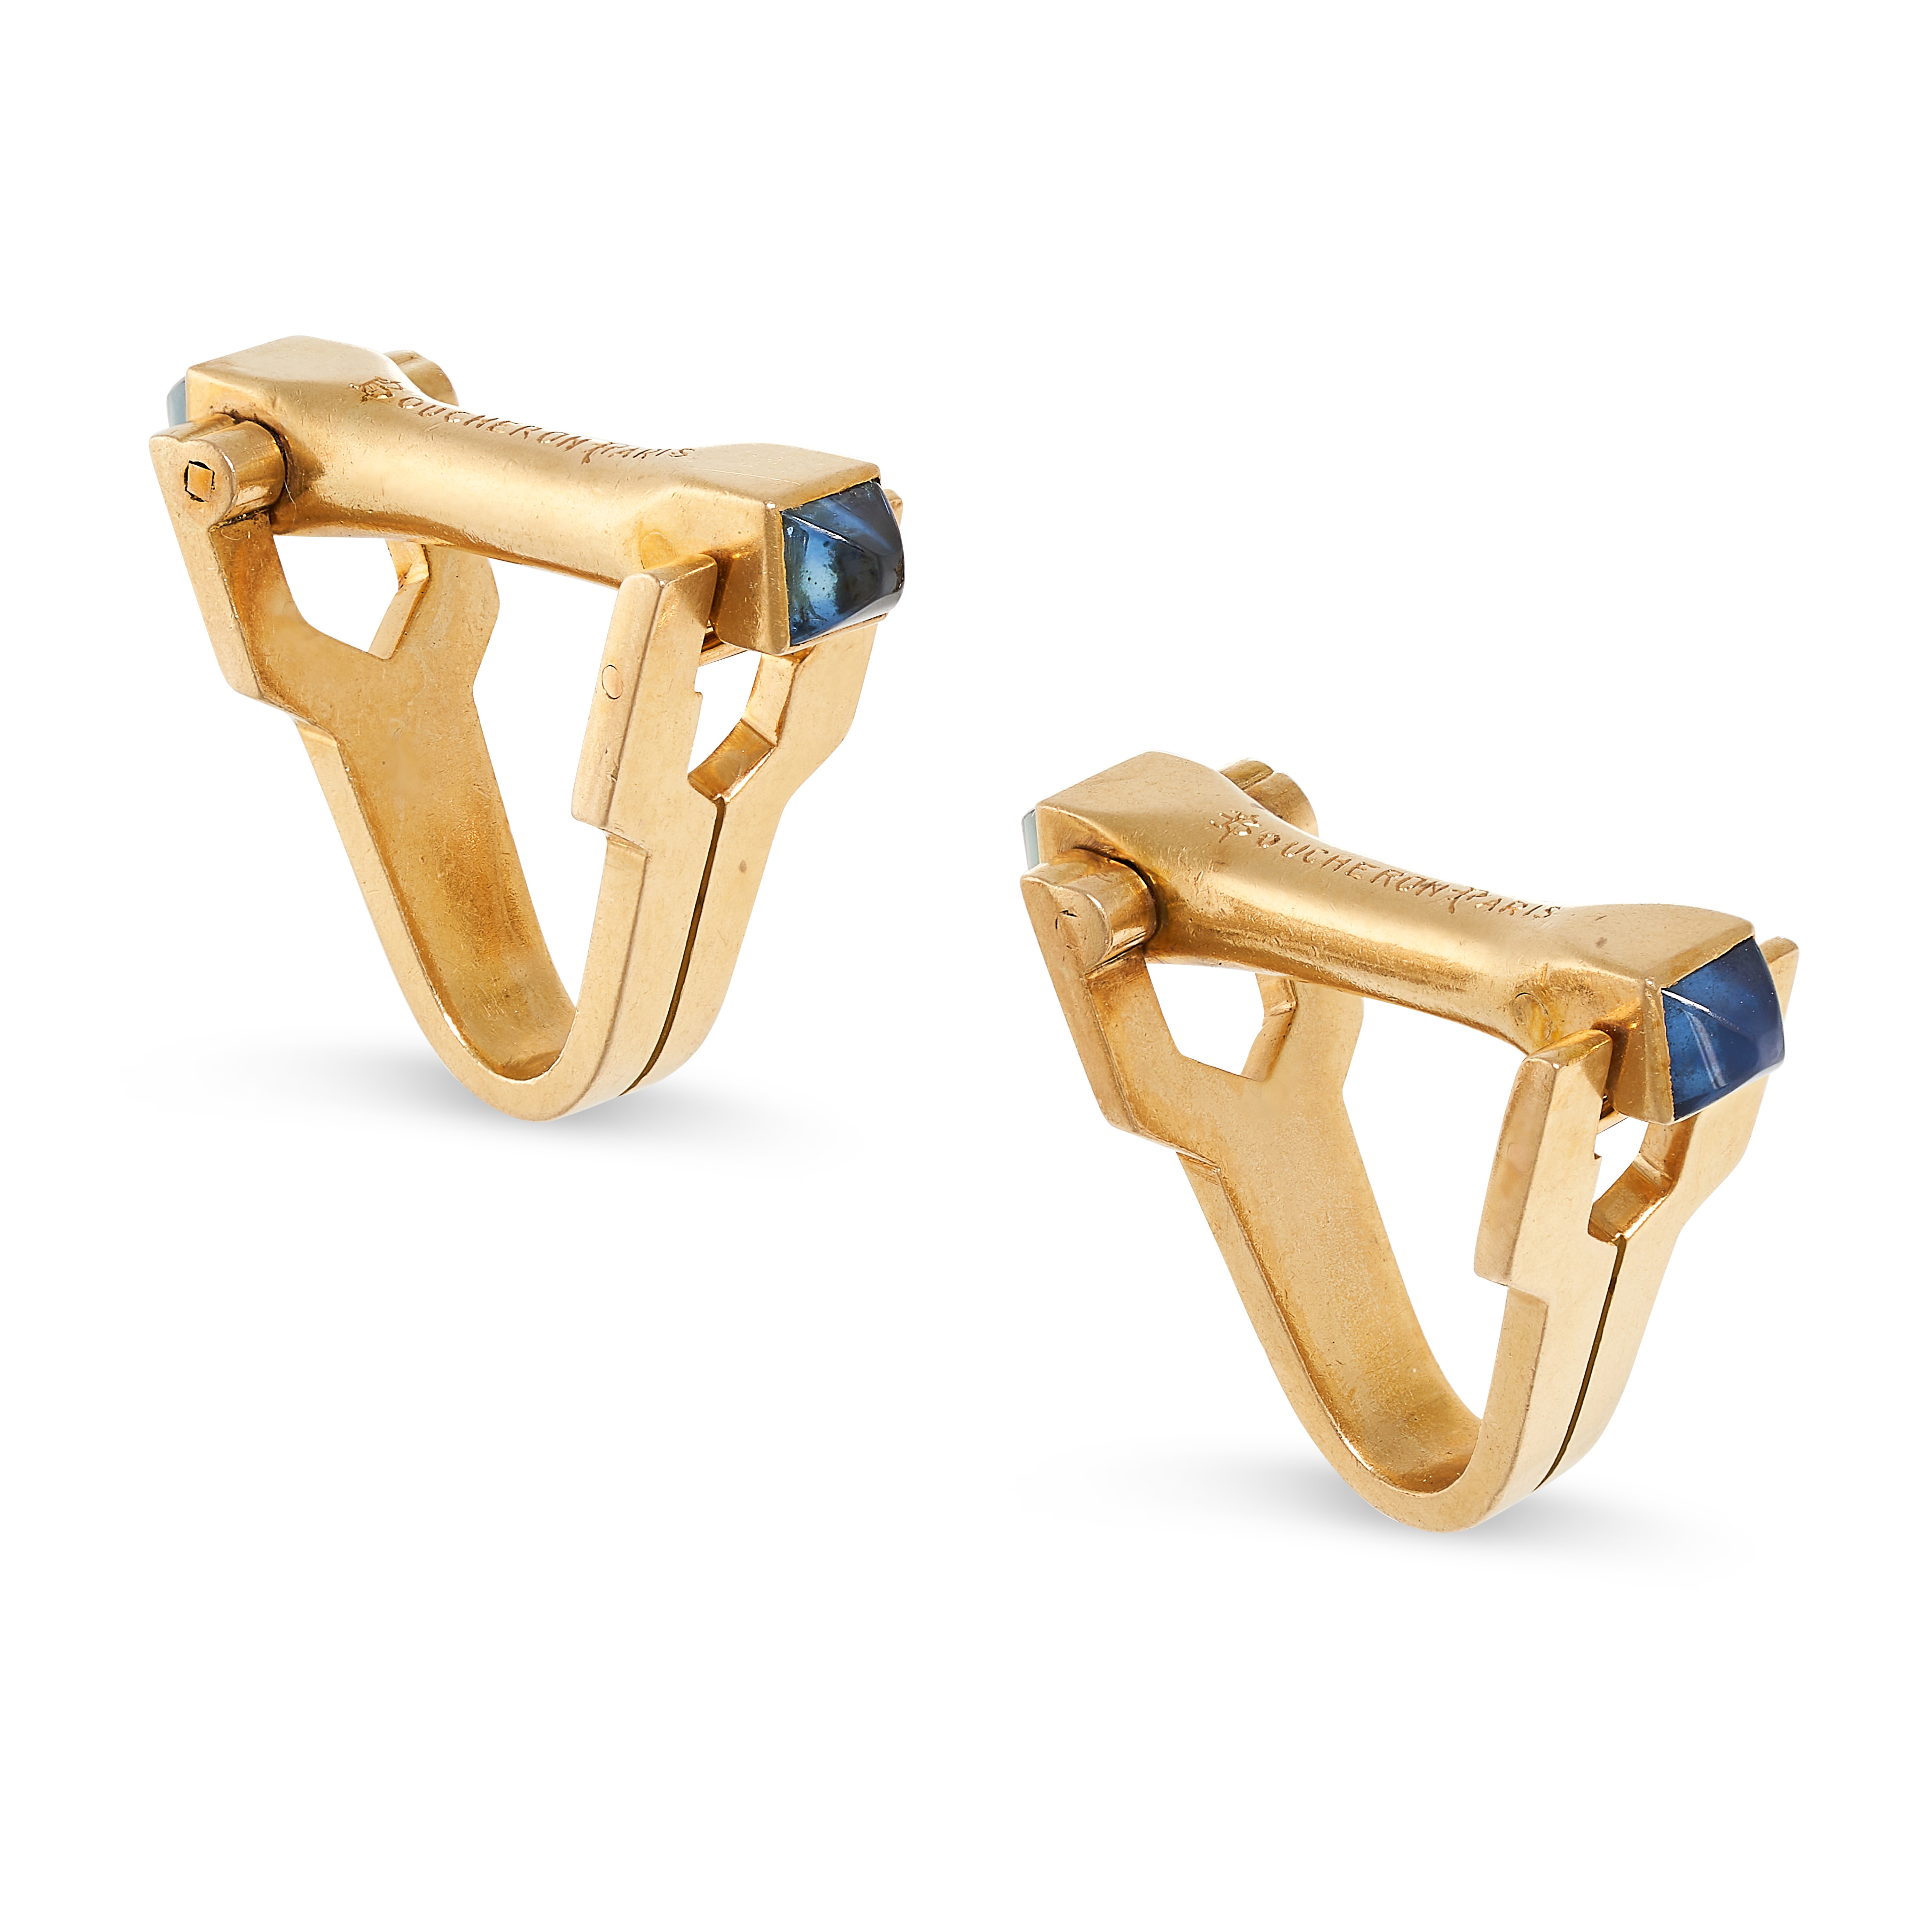 BOUCHERON, A PAIR OF VINTAGE SAPPHIRE STIRRUP CUFFLINKS in 18ct yellow gold, each formed of two